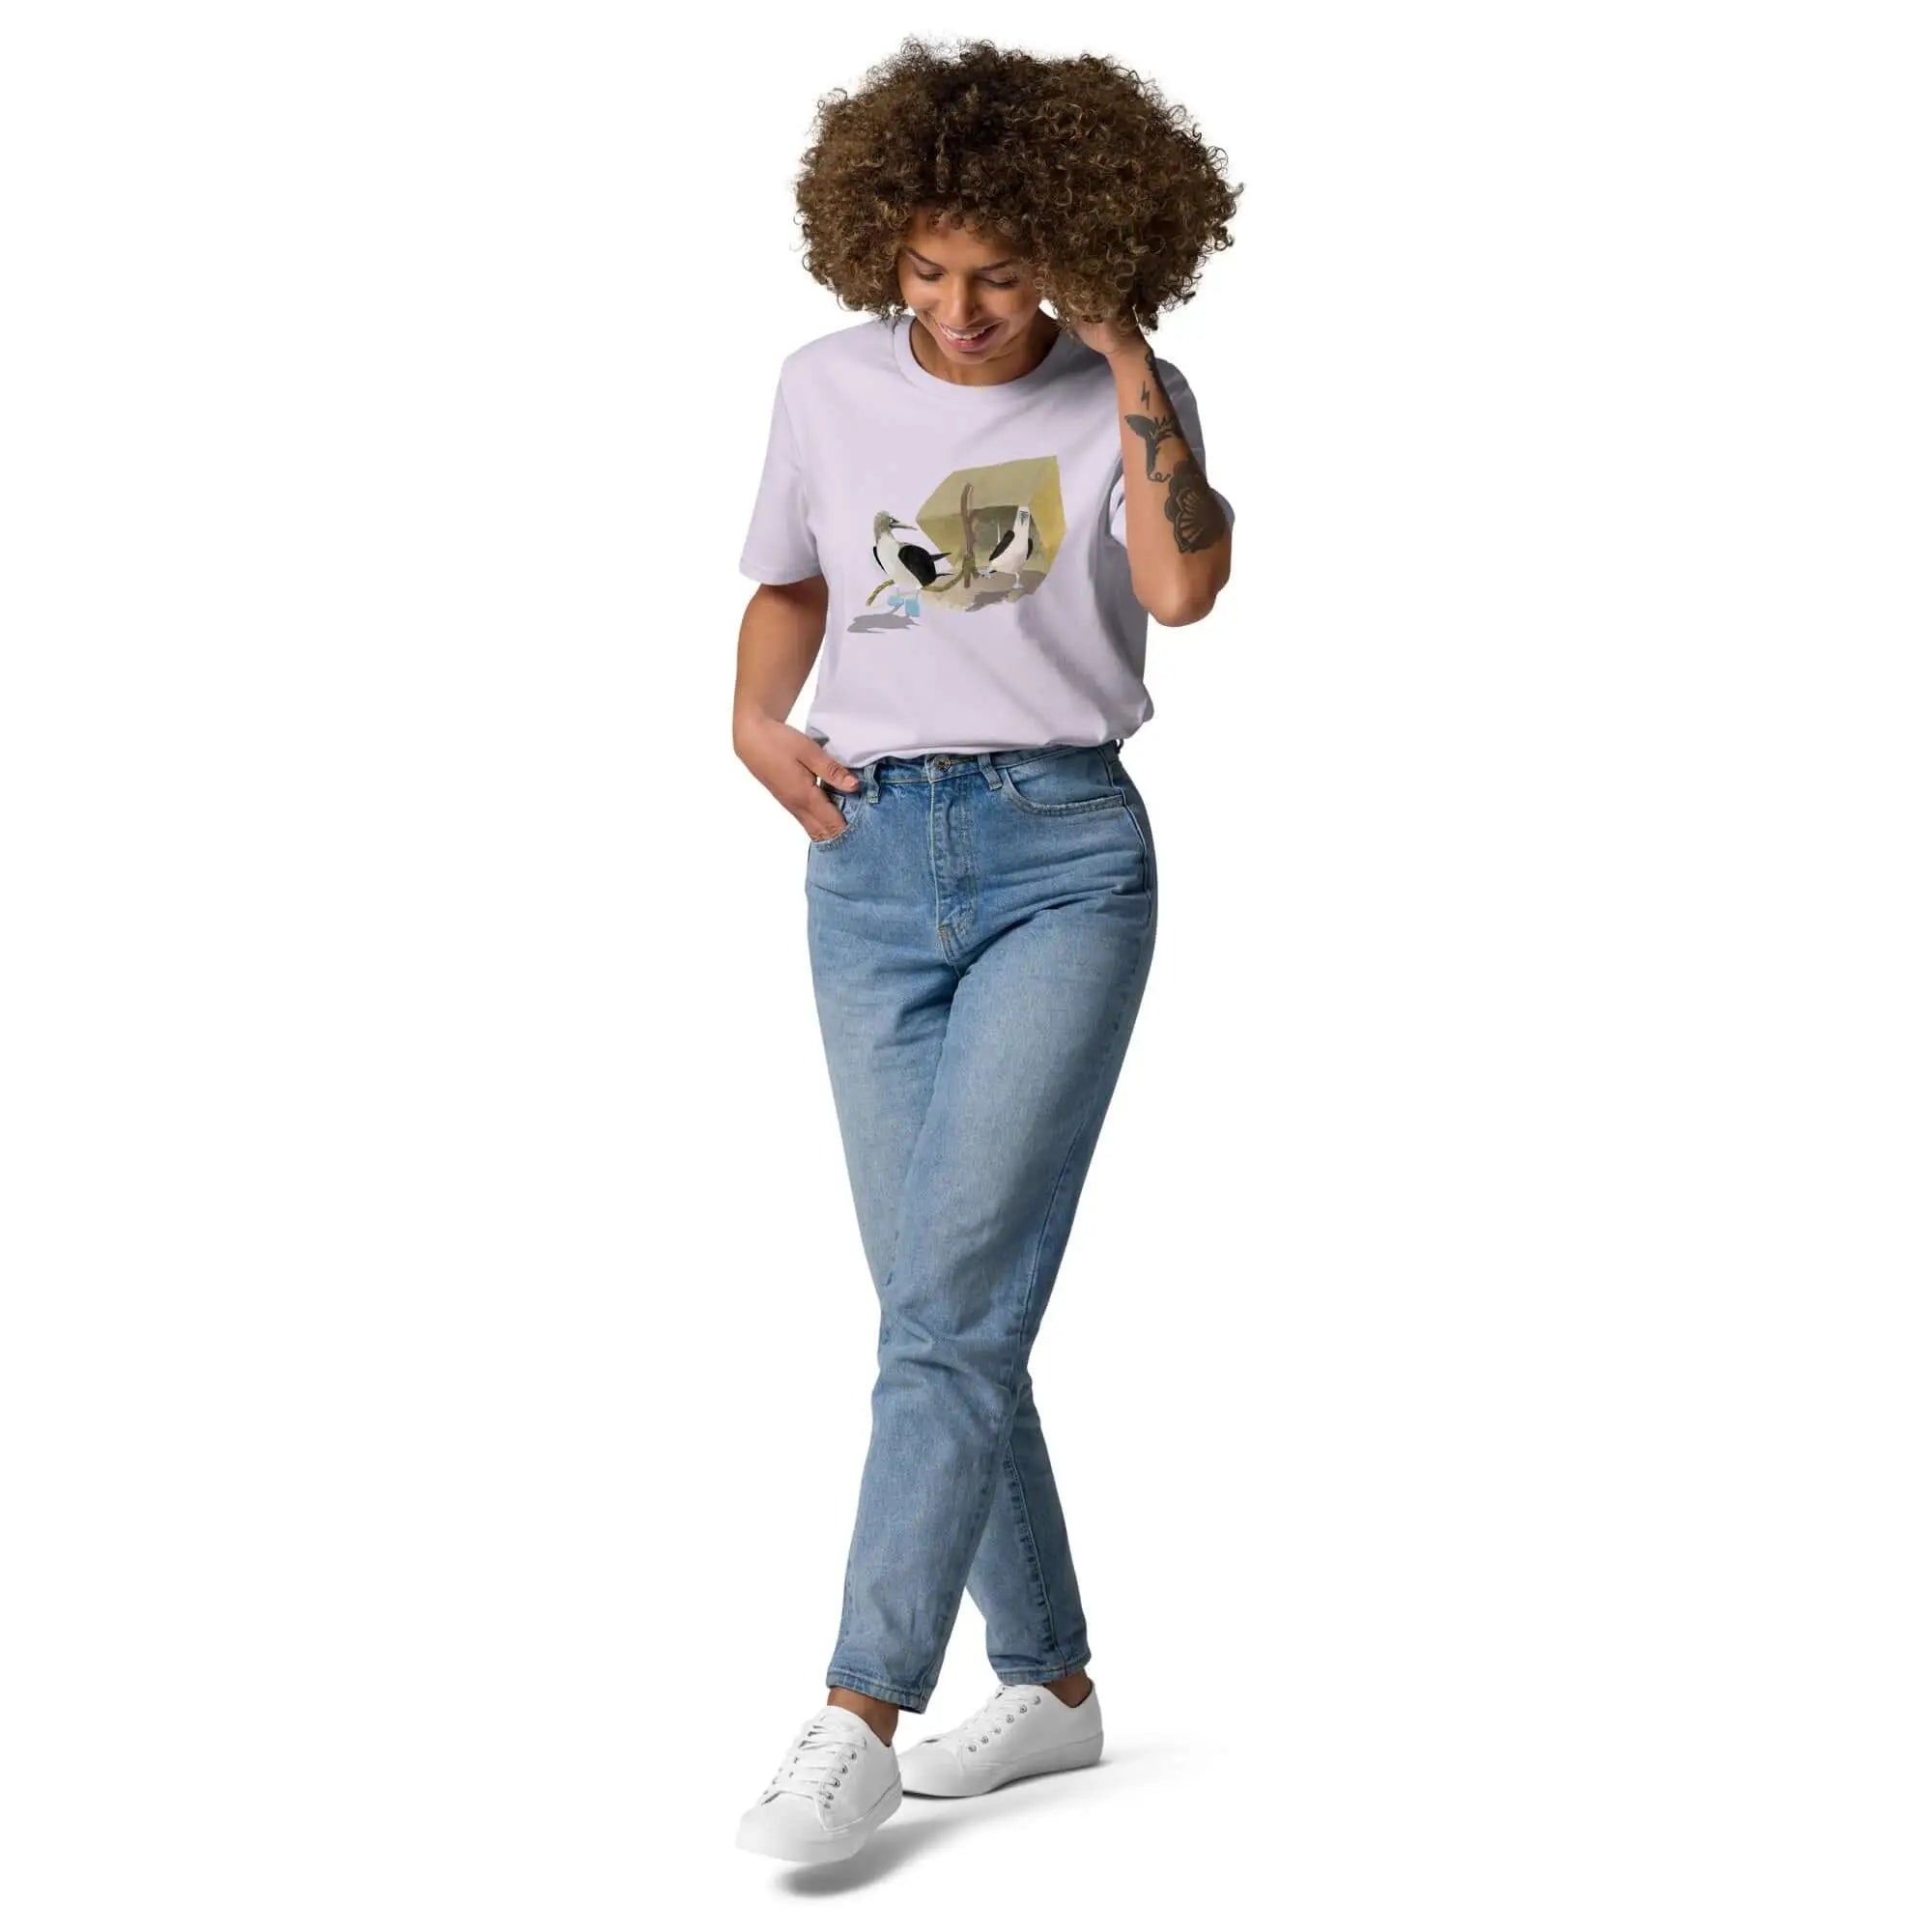 Organic Cotton T-Shirt by Booby Trap featuring a woman in white tee and jeans